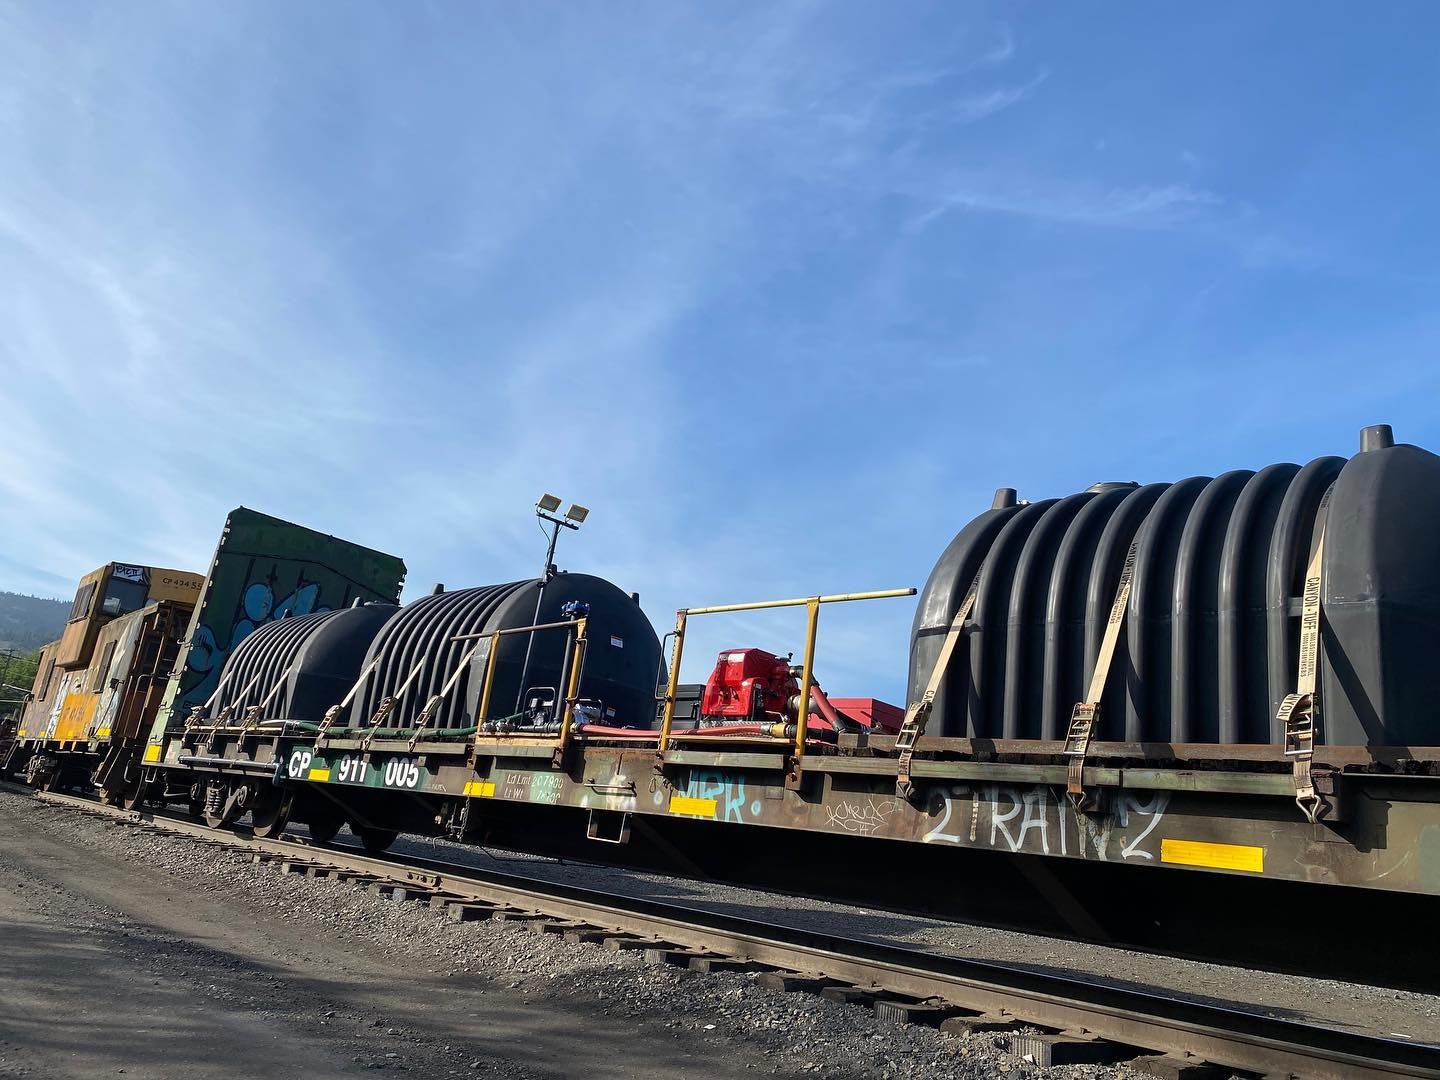 We were excited to see one of the CP Rail fire trains roll into town equipped with Tohatsu fire pumps available thru Delta. At the same time, our Delta Wildfire Response group is busy loading up our response gear for imminent deployment due to curren